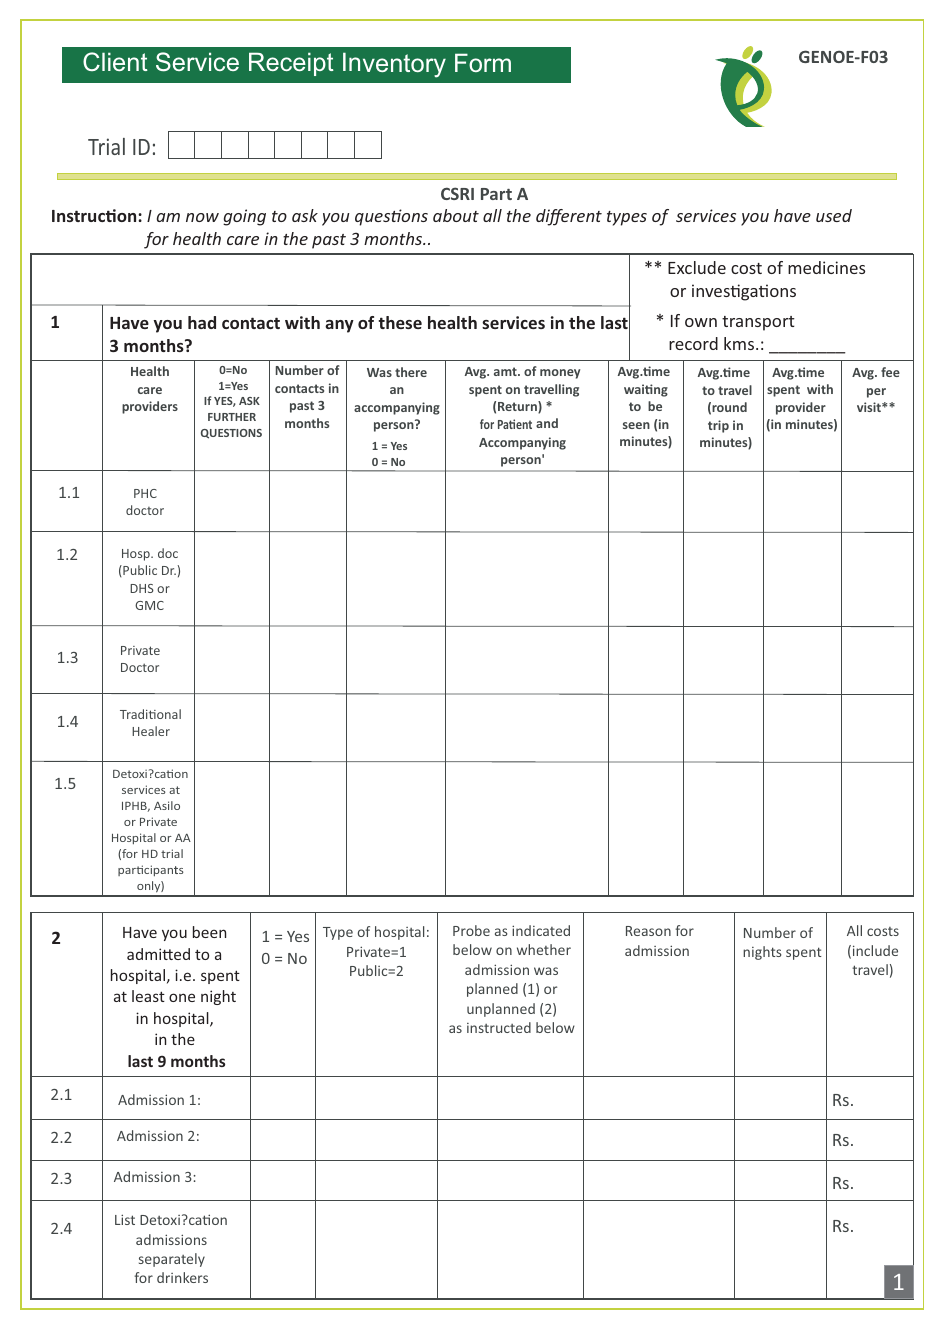 Client Service Receipt Inventory Form - London School of Hygiene  Tropical Medicine, Page 1